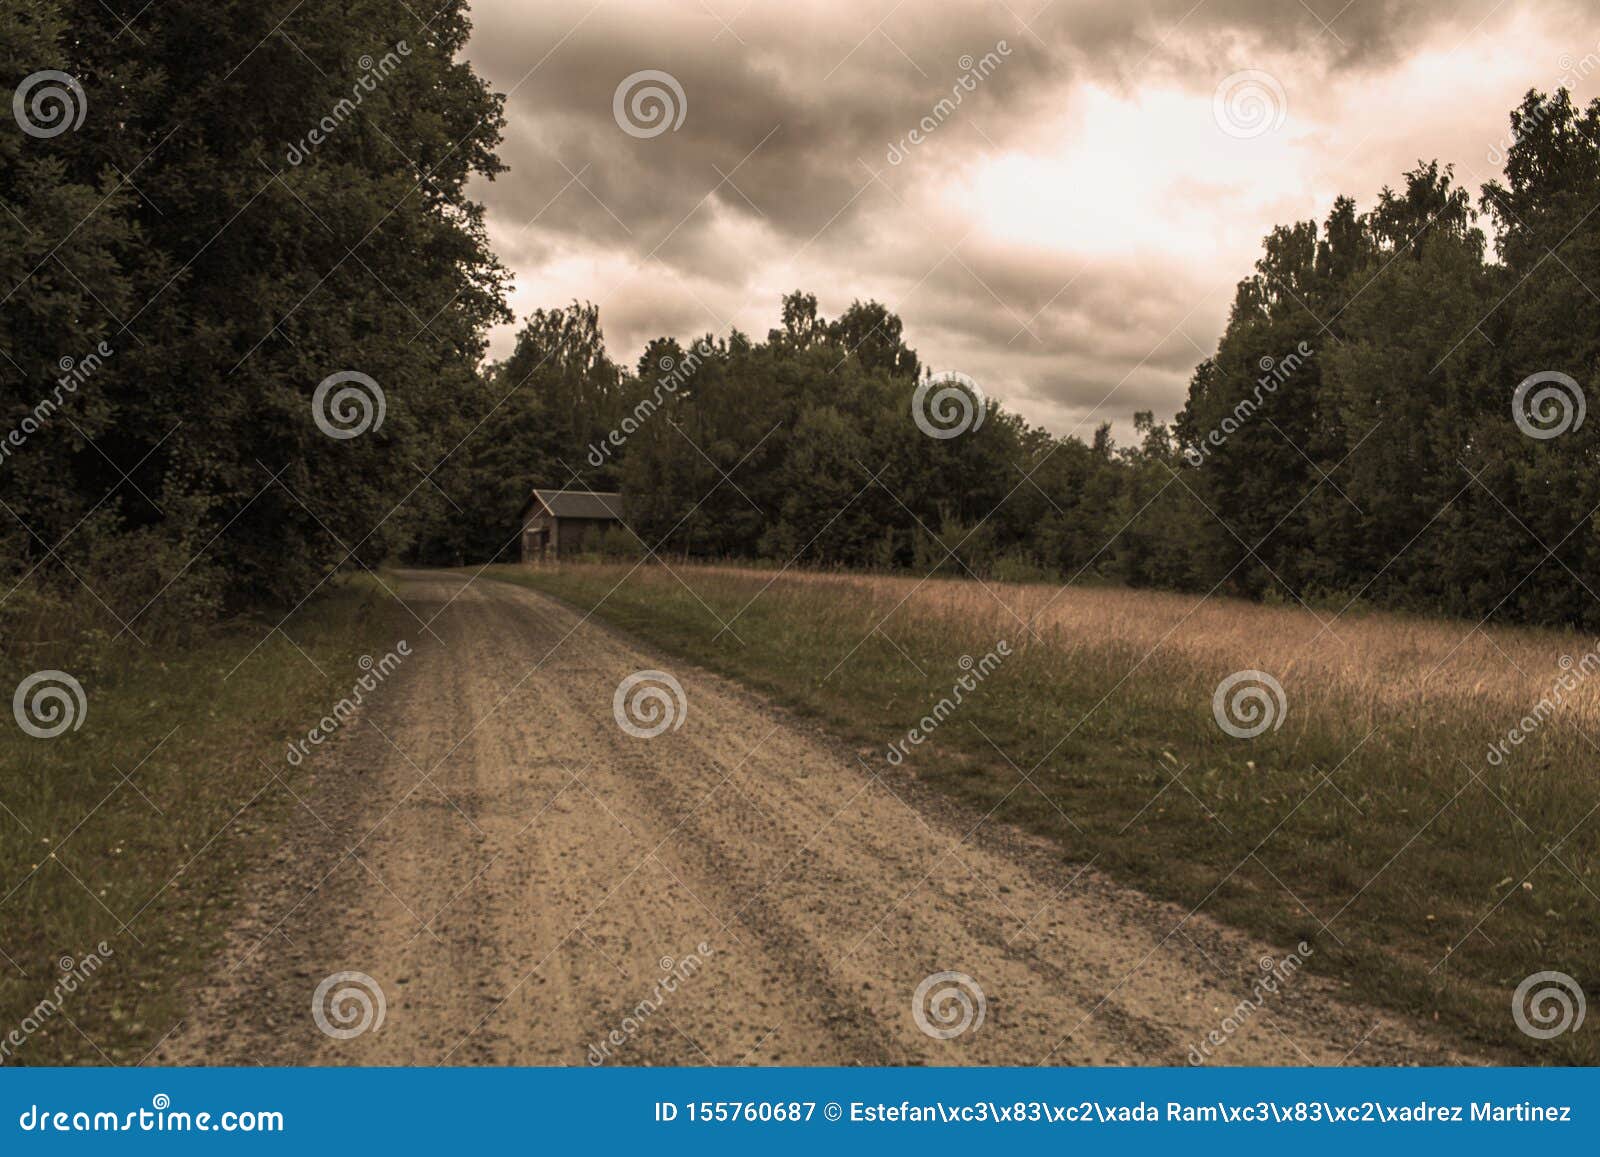 photography of a road in the forest with trees and wooden house in sweden